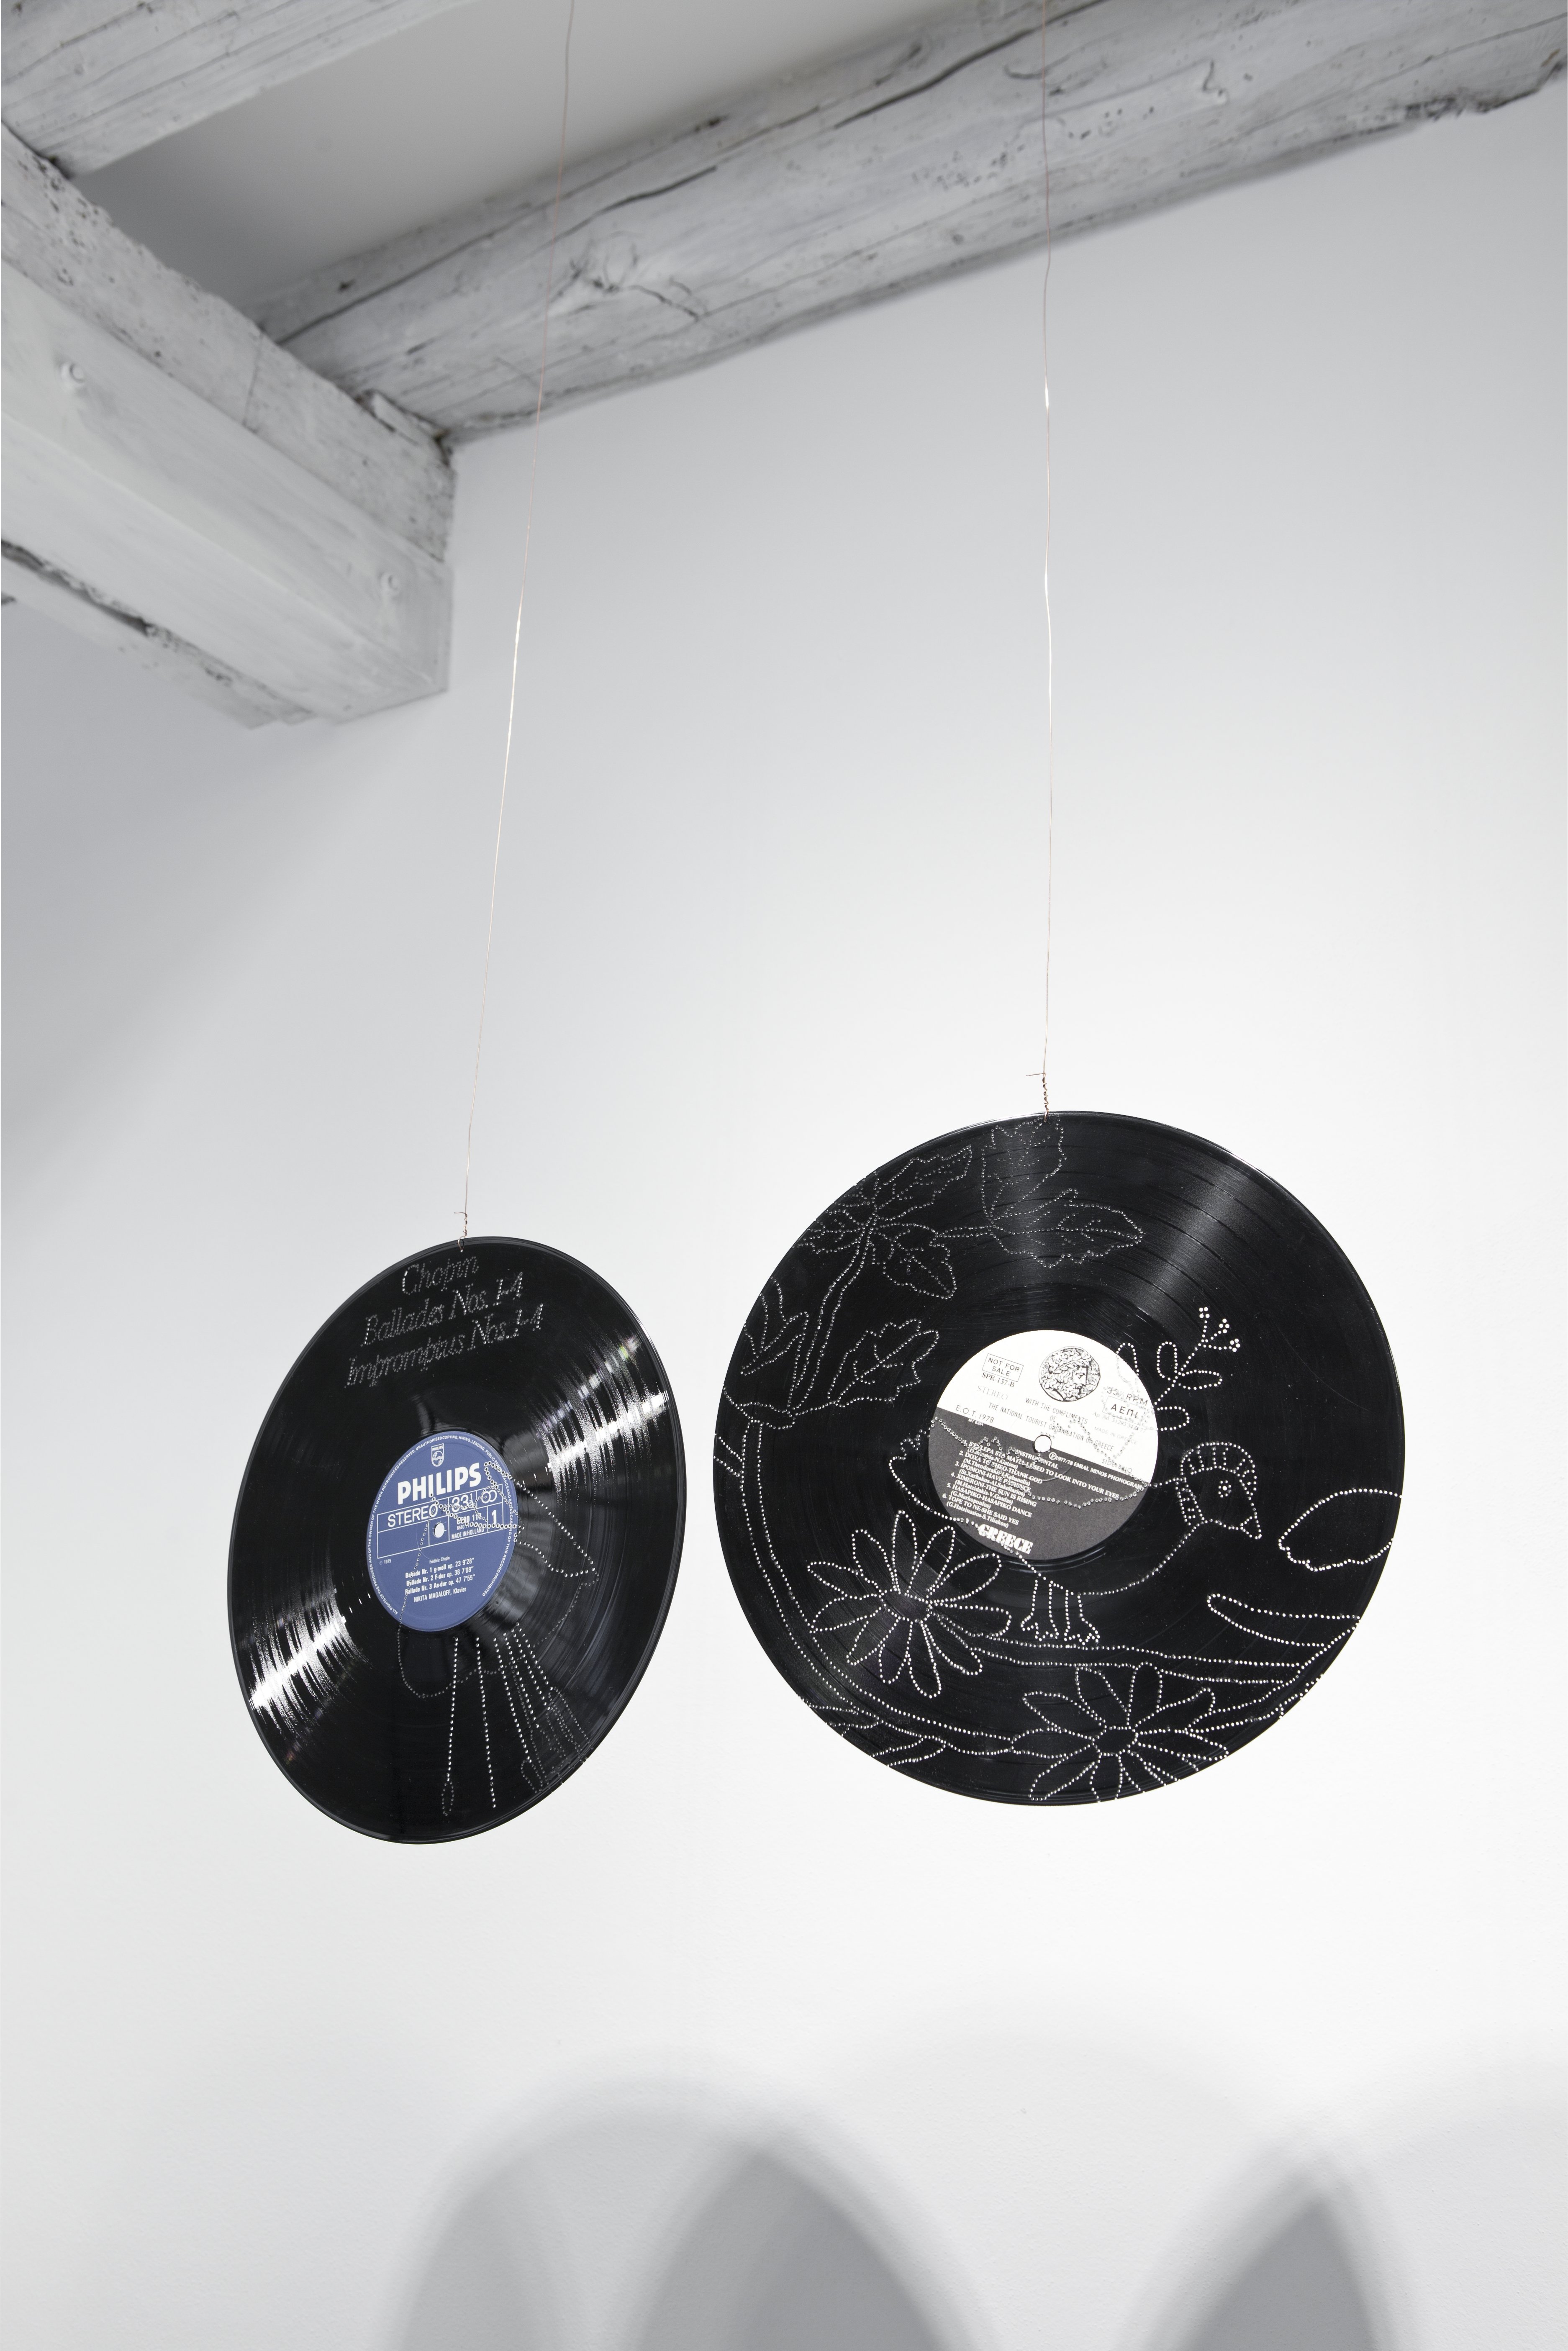 Installation view by Stefano Arienti, Dischi, 2013, perforated vinyl records